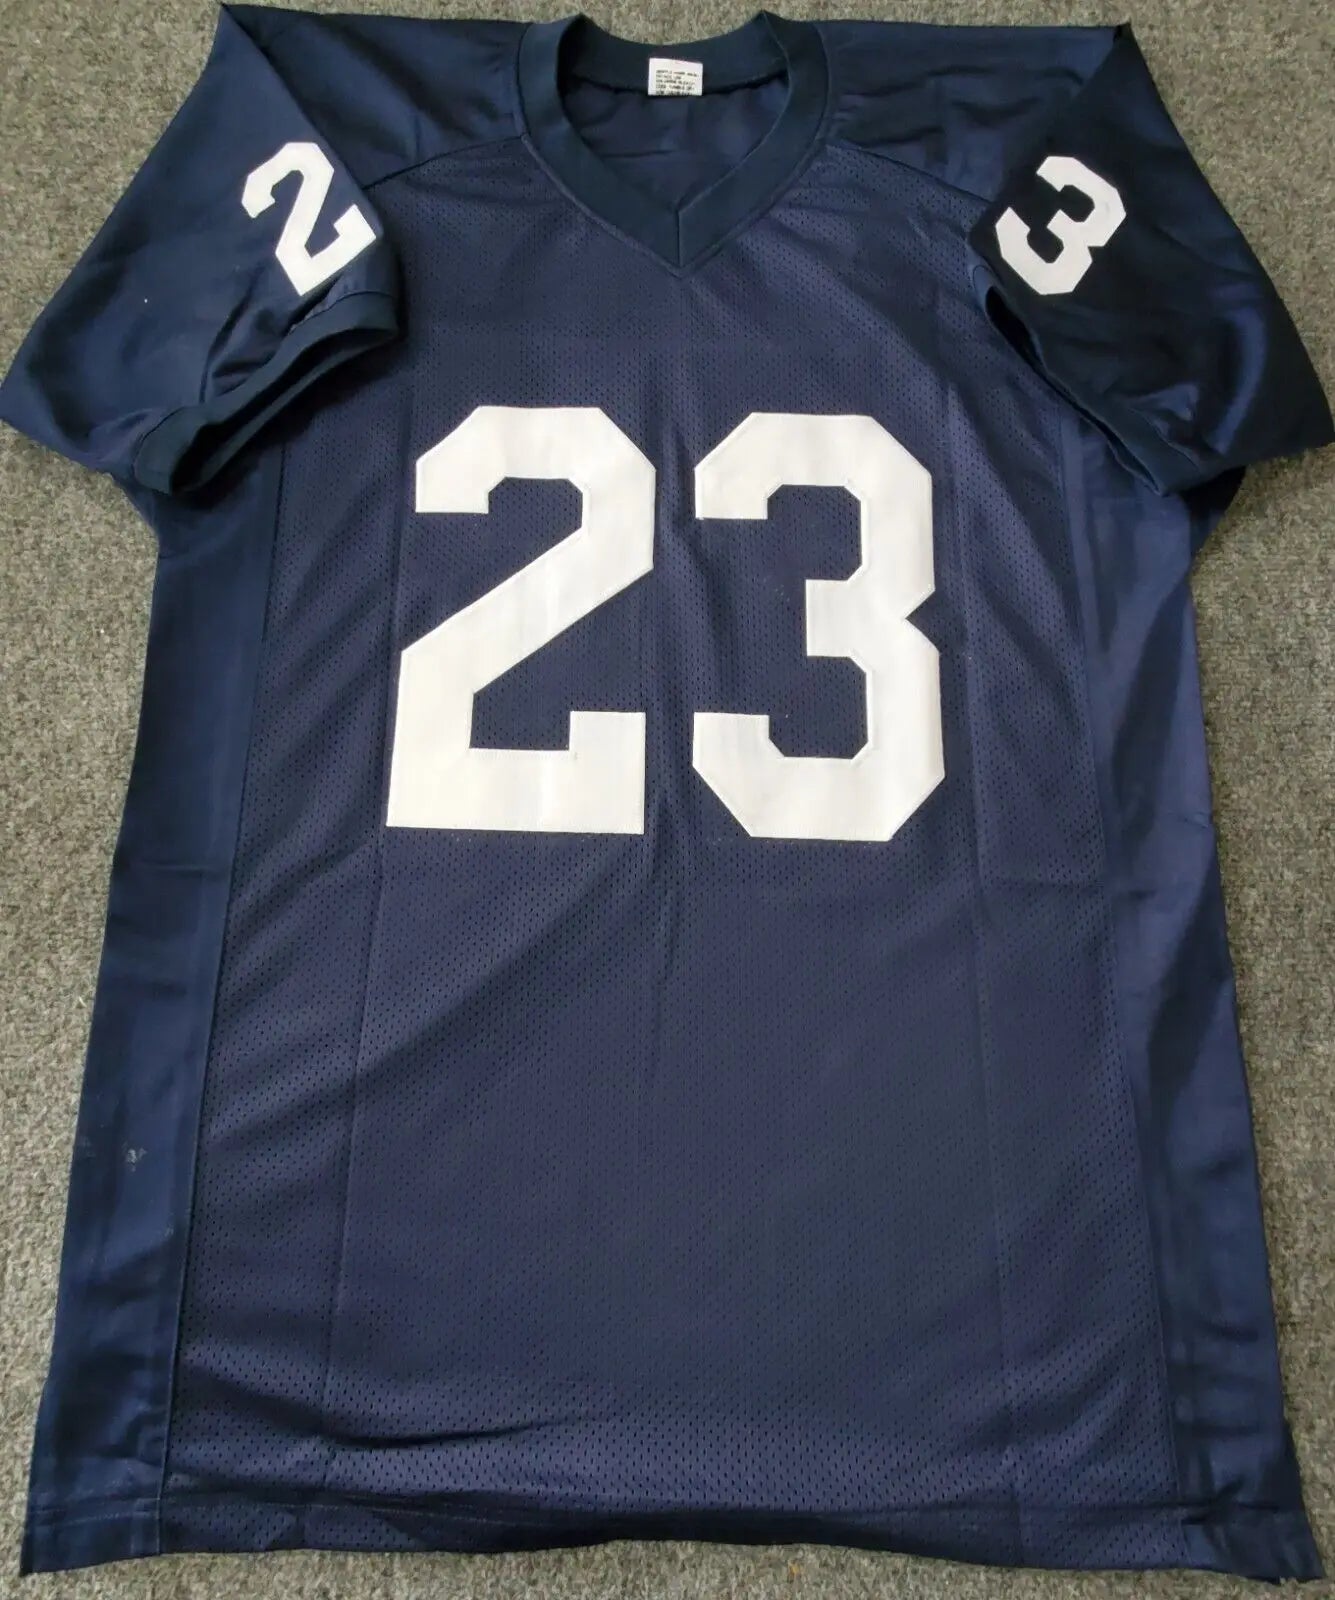 MVP Authentics Penn State Lydell Mitchell Autographed Signed Inscribed Jersey Jsa Coa 90 sports jersey framing , jersey framing